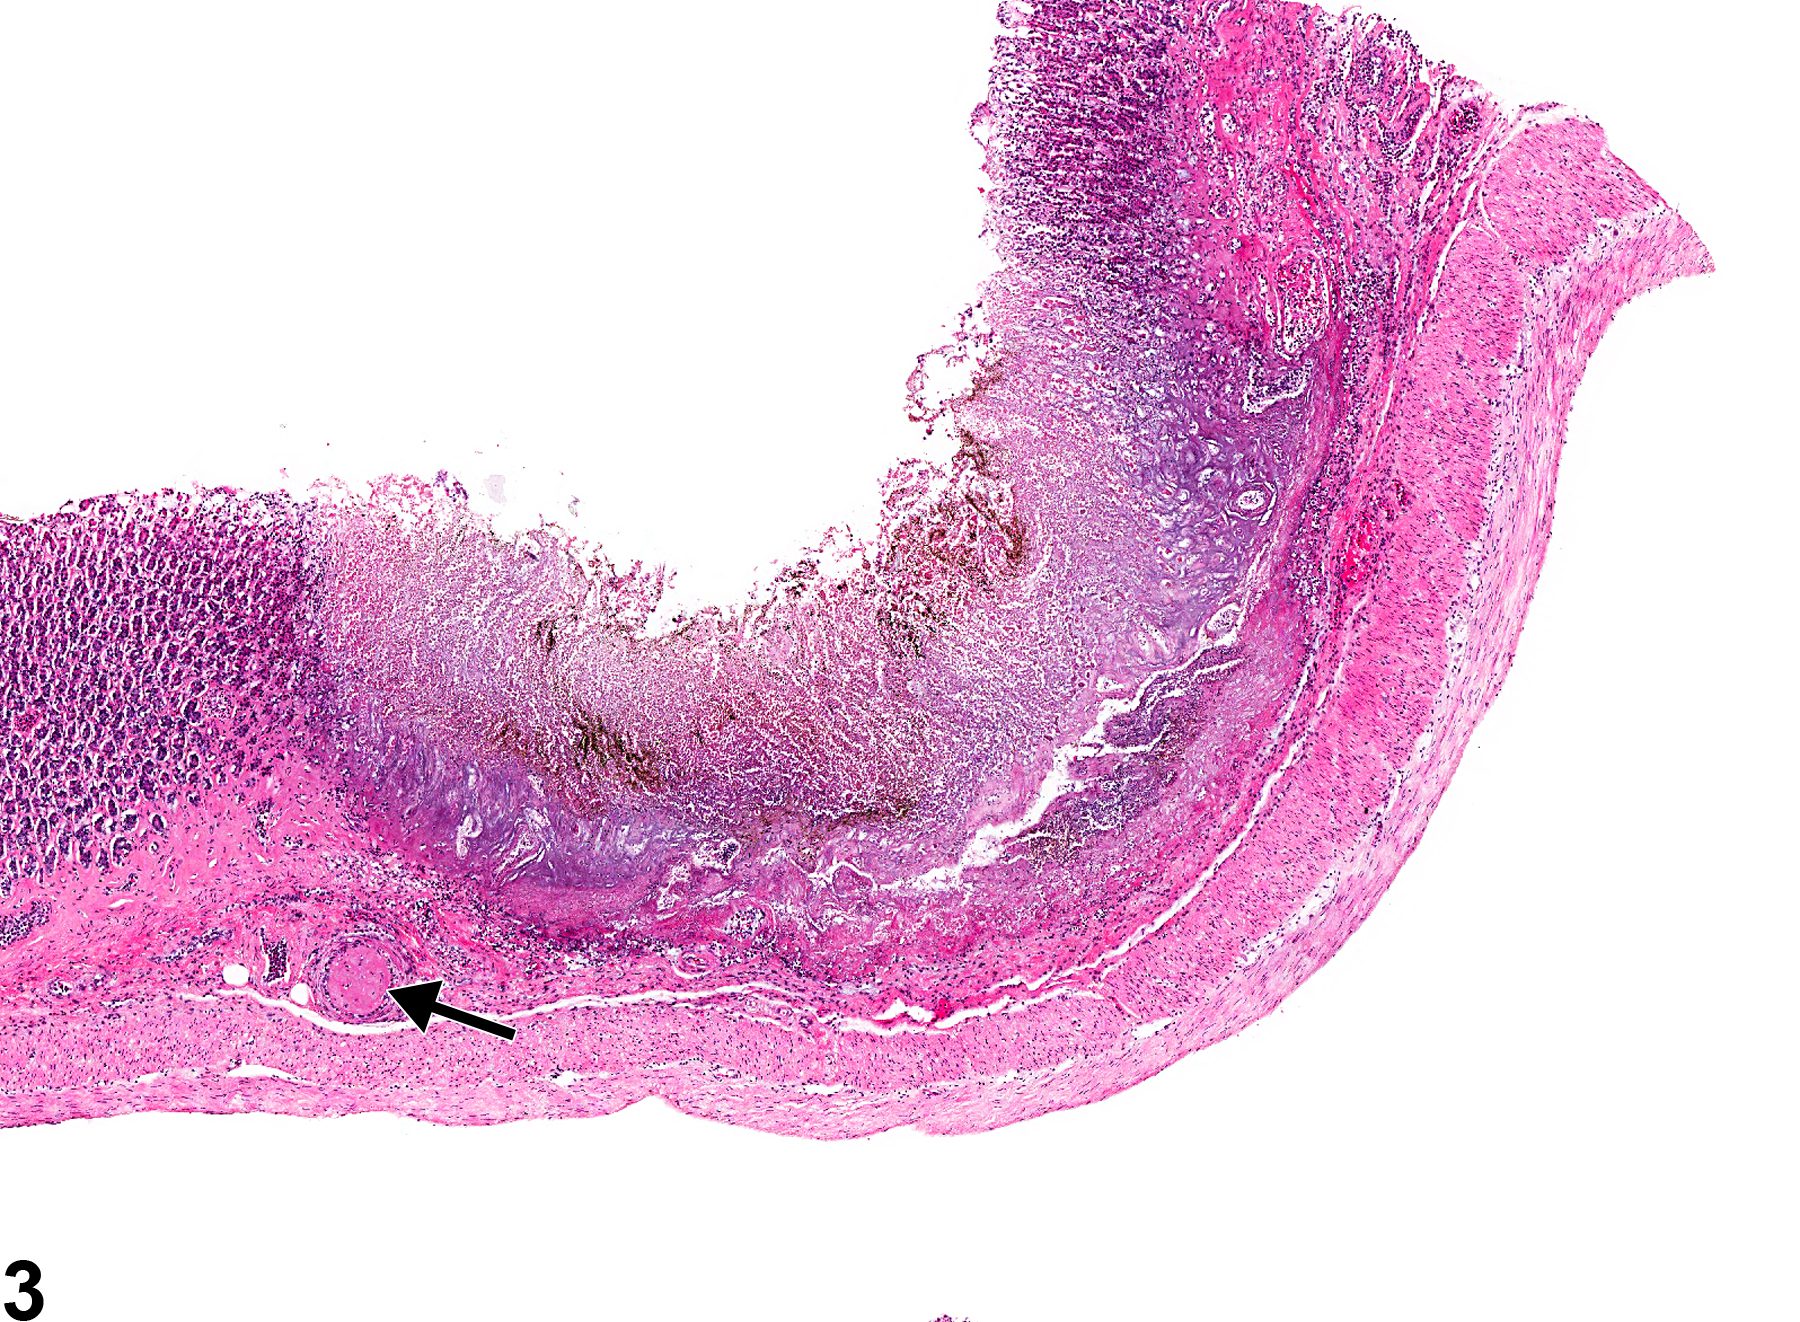 Image of thrombus in the glandular stomach from a male F344/N rat in a chronic study